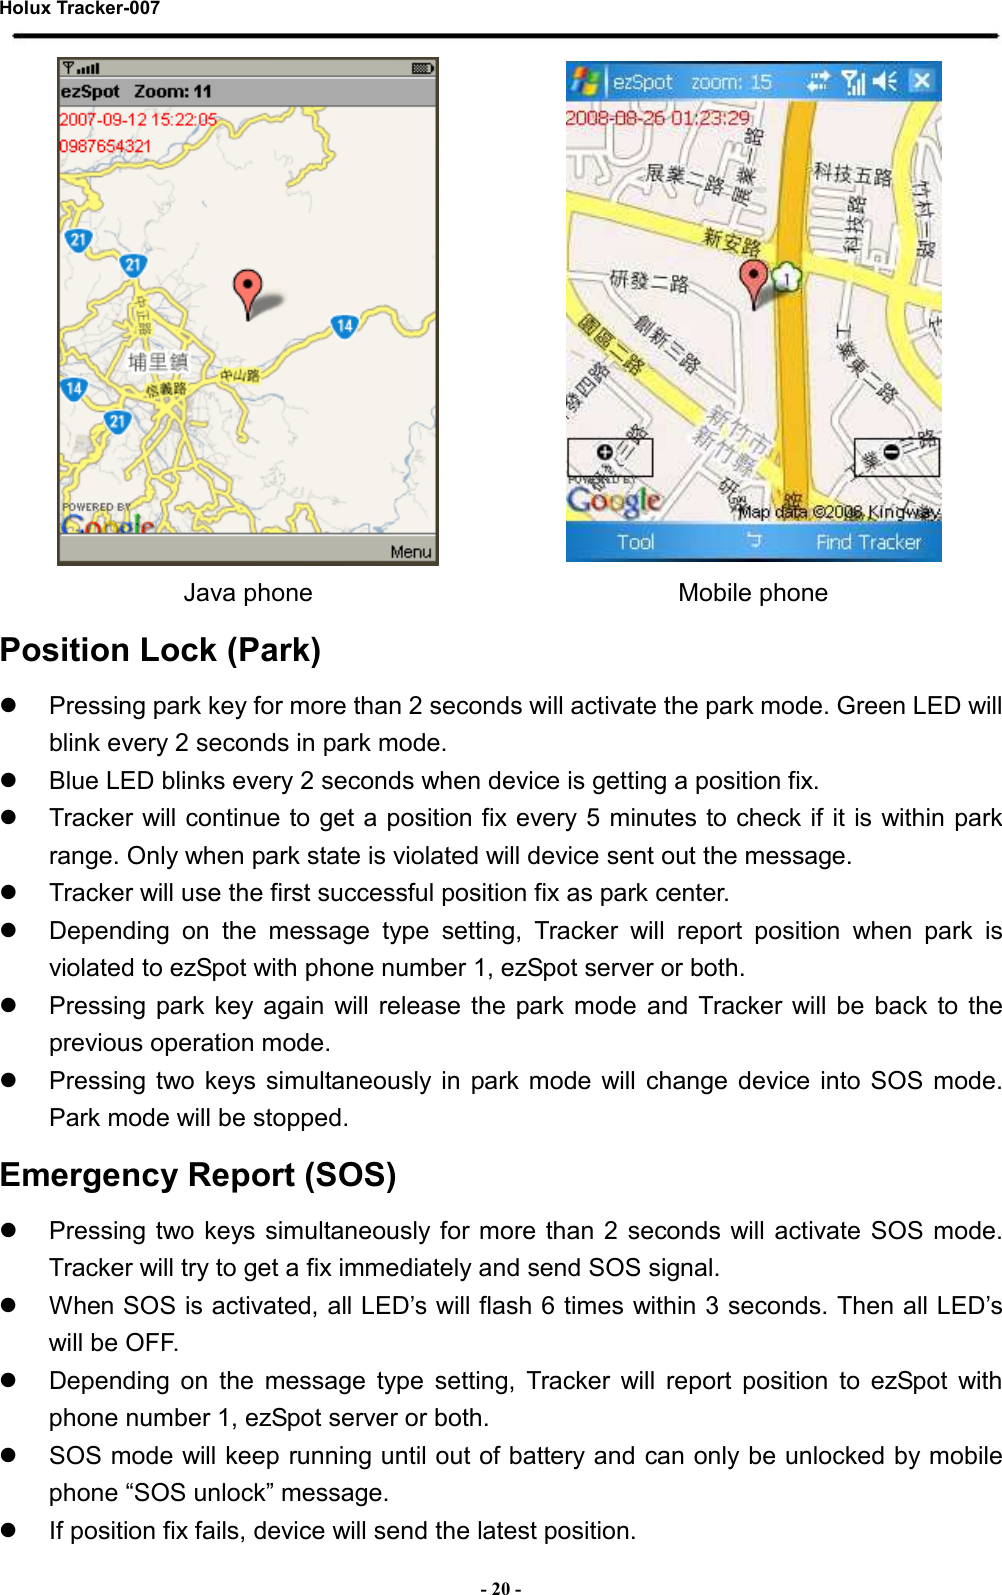 Holux Tracker-007  - 20 -   Java phone  Mobile phone Position Lock (Park)   Pressing park key for more than 2 seconds will activate the park mode. Green LED will blink every 2 seconds in park mode.   Blue LED blinks every 2 seconds when device is getting a position fix.   Tracker will continue to get a position fix every 5 minutes to check if it is within park range. Only when park state is violated will device sent out the message.   Tracker will use the first successful position fix as park center.   Depending  on  the  message  type  setting,  Tracker  will  report  position  when  park  is violated to ezSpot with phone number 1, ezSpot server or both.   Pressing  park  key  again  will release  the  park  mode  and  Tracker will be  back  to  the previous operation mode.   Pressing  two keys  simultaneously in  park  mode  will change  device into  SOS  mode. Park mode will be stopped. Emergency Report (SOS)   Pressing two  keys  simultaneously for more  than 2 seconds will activate SOS mode. Tracker will try to get a fix immediately and send SOS signal.   When SOS is activated, all LED’s will flash 6 times within 3 seconds. Then all LED’s will be OFF.   Depending  on  the  message  type  setting,  Tracker  will  report  position  to  ezSpot  with phone number 1, ezSpot server or both.   SOS mode will keep running until out of battery and can only be unlocked by mobile phone “SOS unlock” message.   If position fix fails, device will send the latest position. 